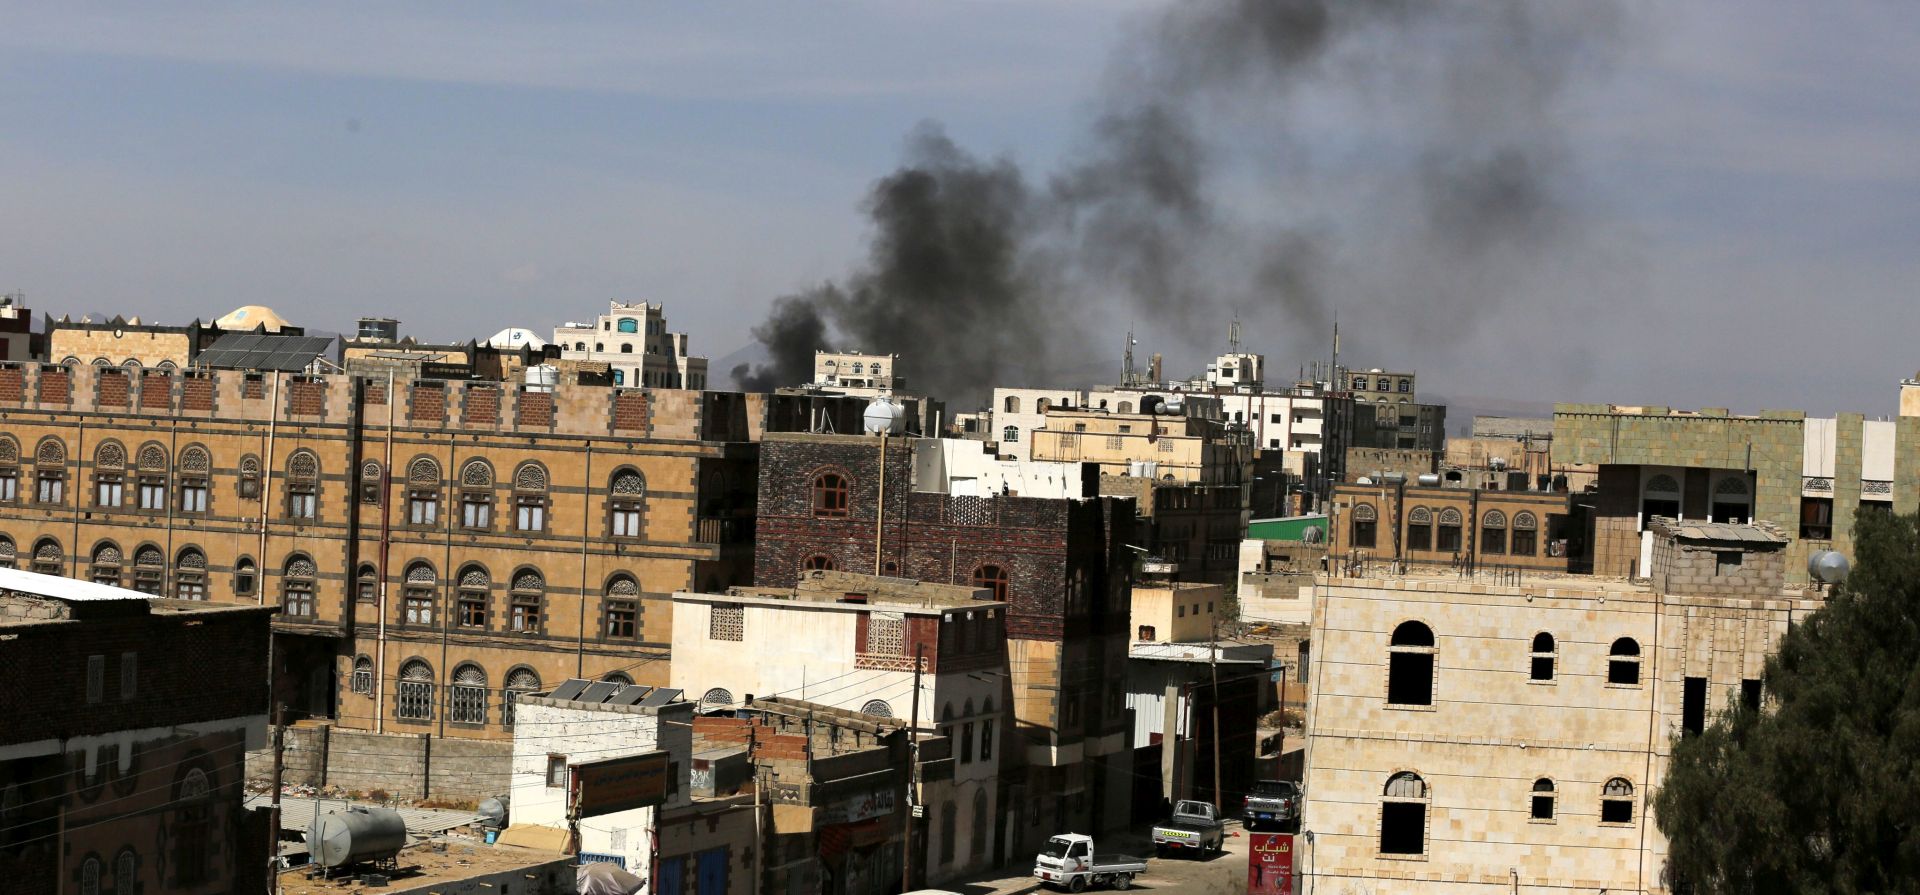 epa05741693 Black smoke billows above a neighborhood following an alleged Saudi-led airstrike targeting a Houthi-held position in Sana'a, Yemen, 22 January 2017. According to reports, the Saudi-led military coalition intensified airstrikes against several positions across Yemen as UN special envoy for Yemen Ismail Ould Cheikh Ahmed tries to push ahead a peace process between the Saudi-backed Yemeni Government and the Houthi rebels in order to end a nearly two-year escalating conflict in the Arab country.  EPA/YAHYA ARHAB